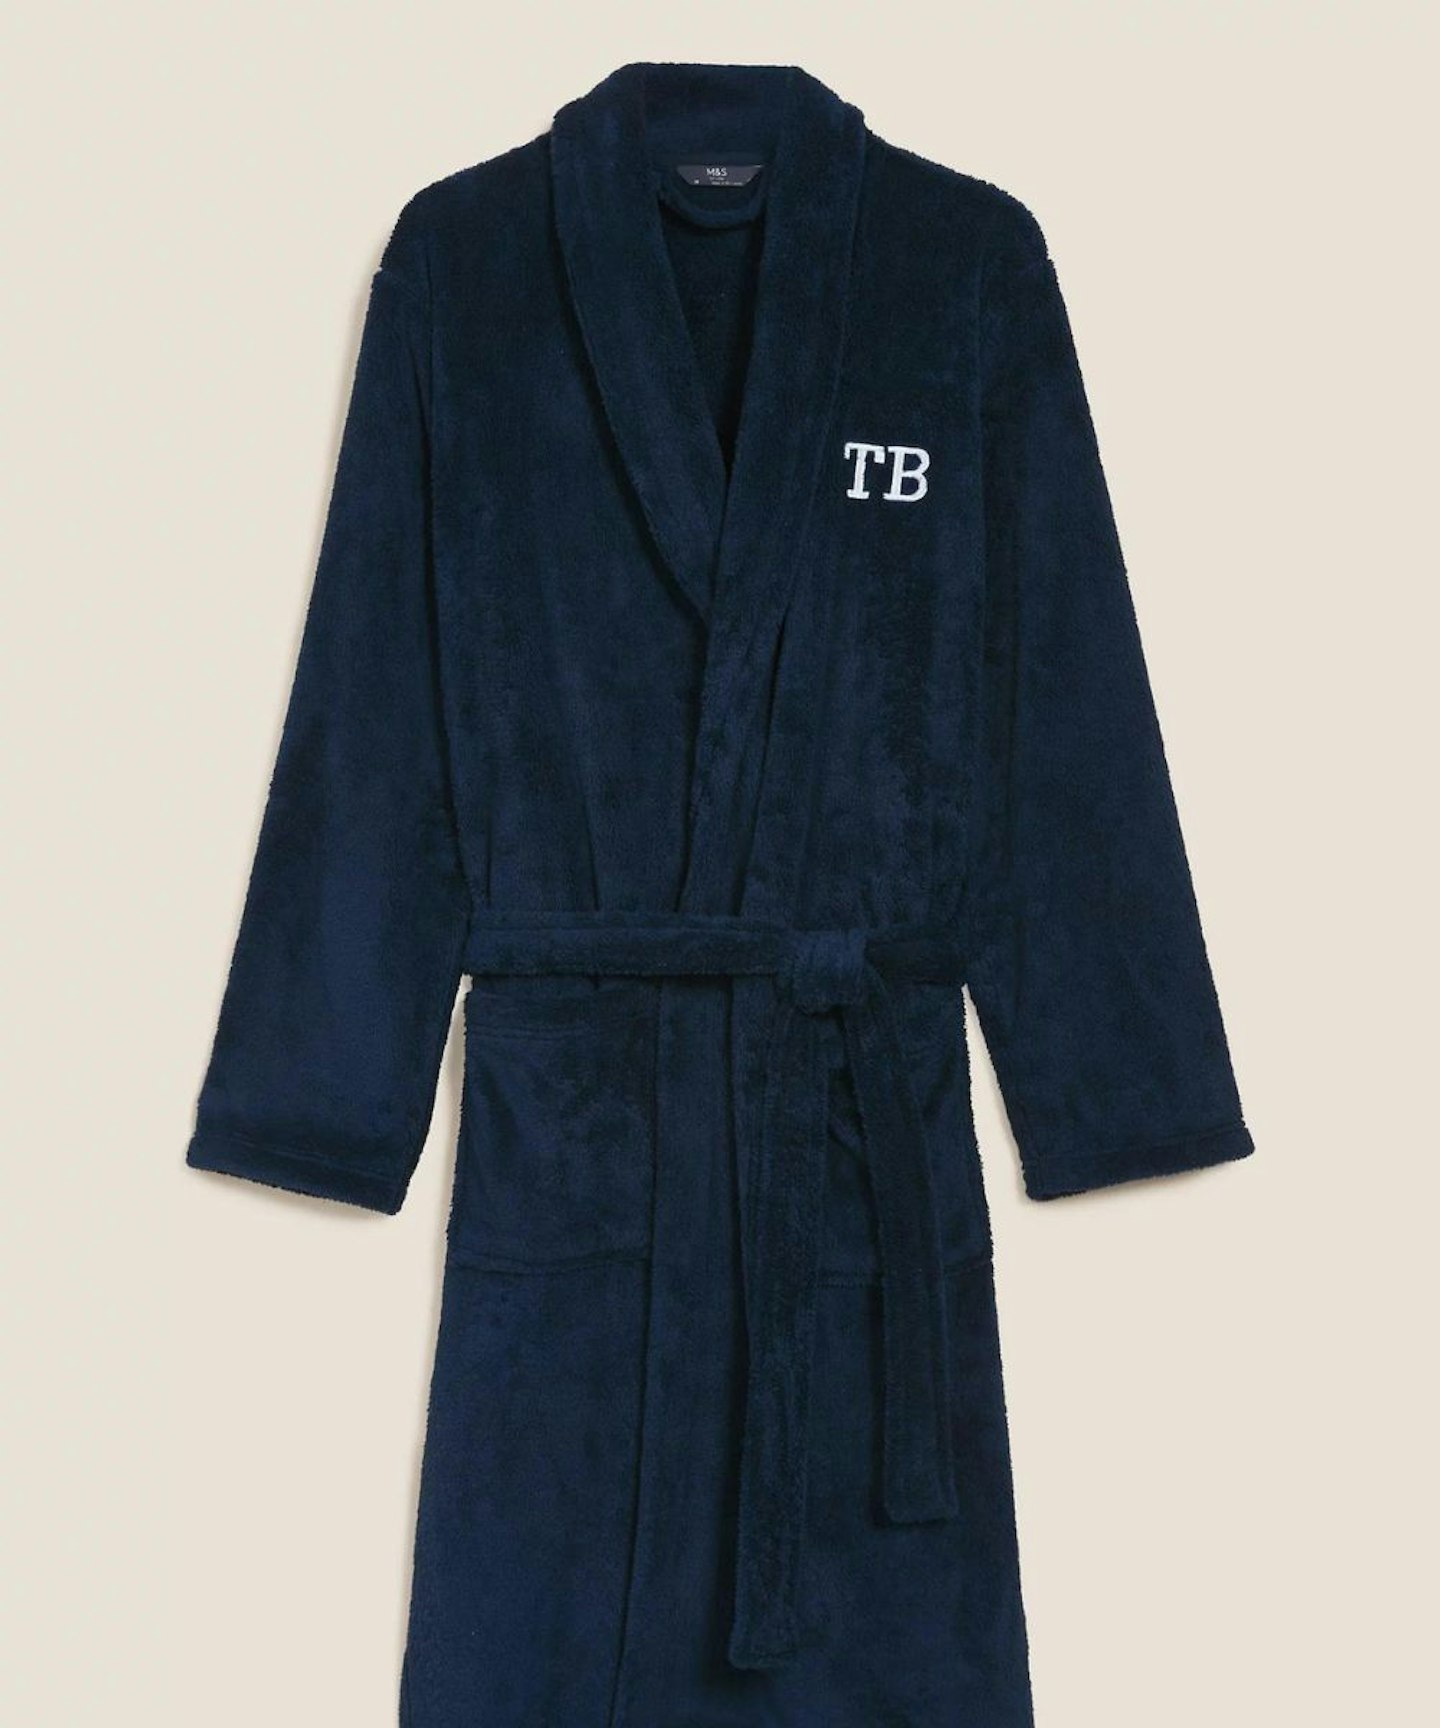 Personalised Men's Supersoft Dressing Gown, M&S